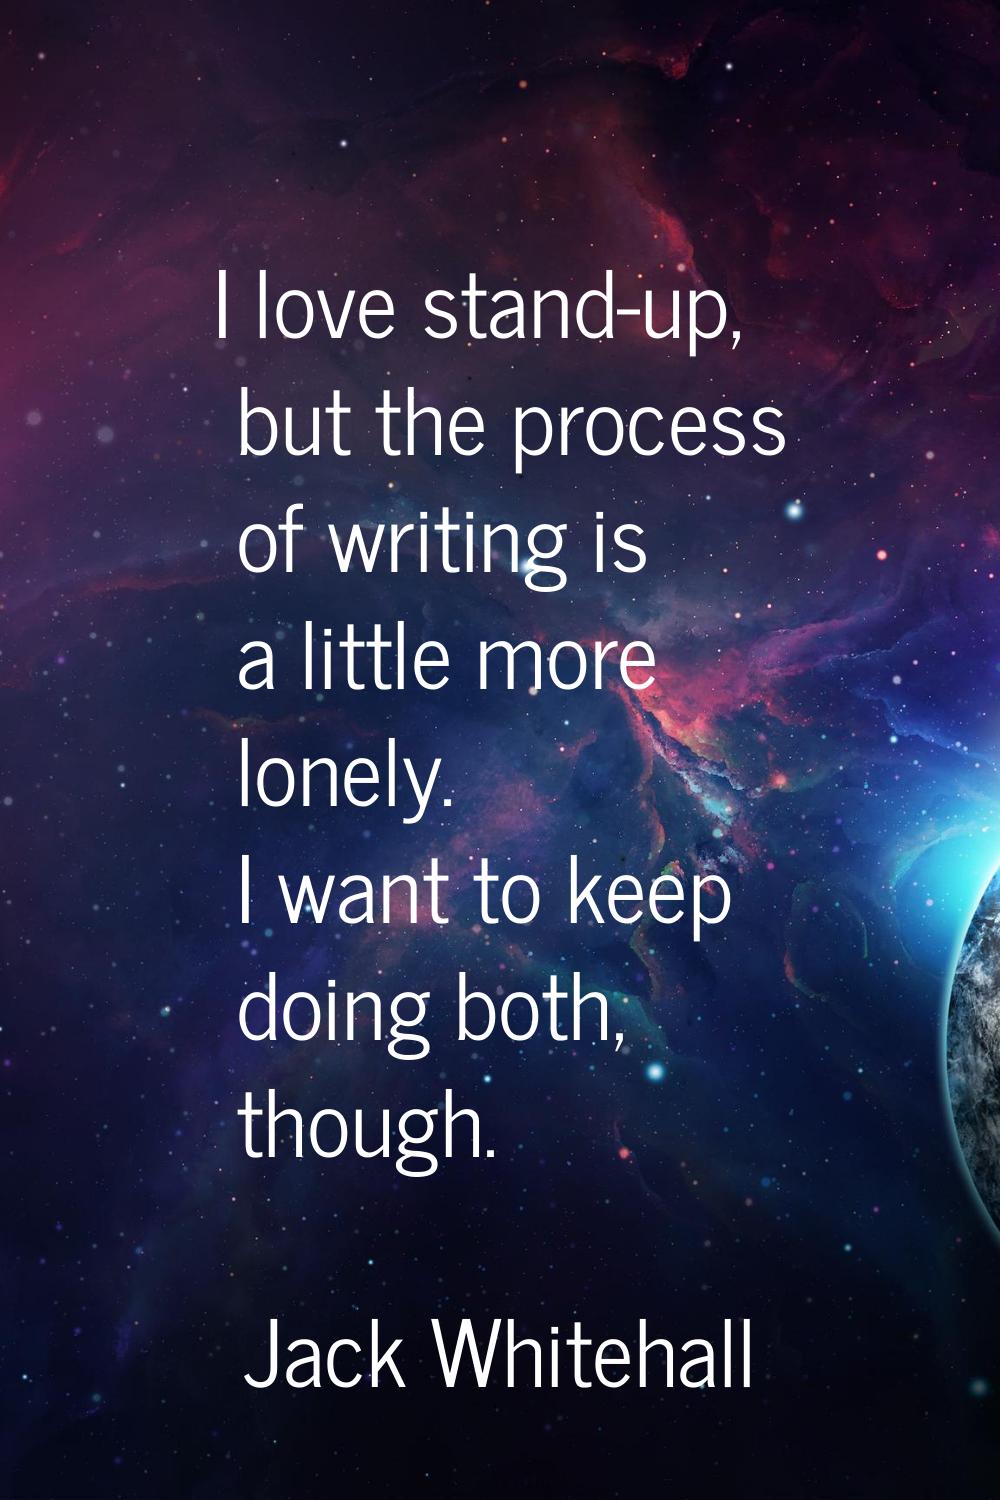 I love stand-up, but the process of writing is a little more lonely. I want to keep doing both, tho